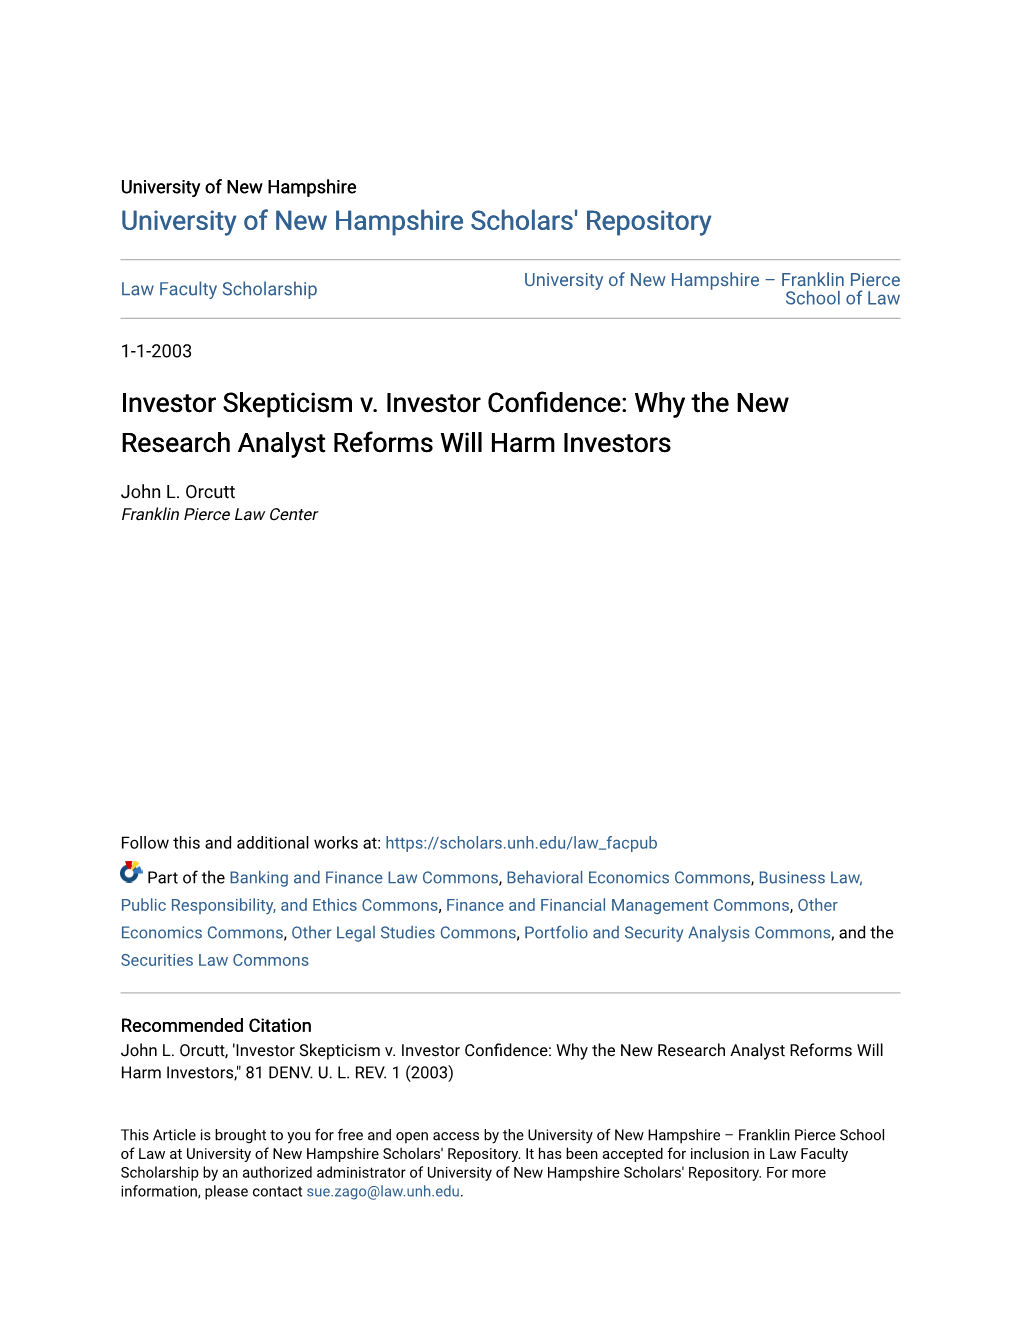 Investor Skepticism V. Investor Confidence: Why the New Research Analyst Reforms Will Harm Investors